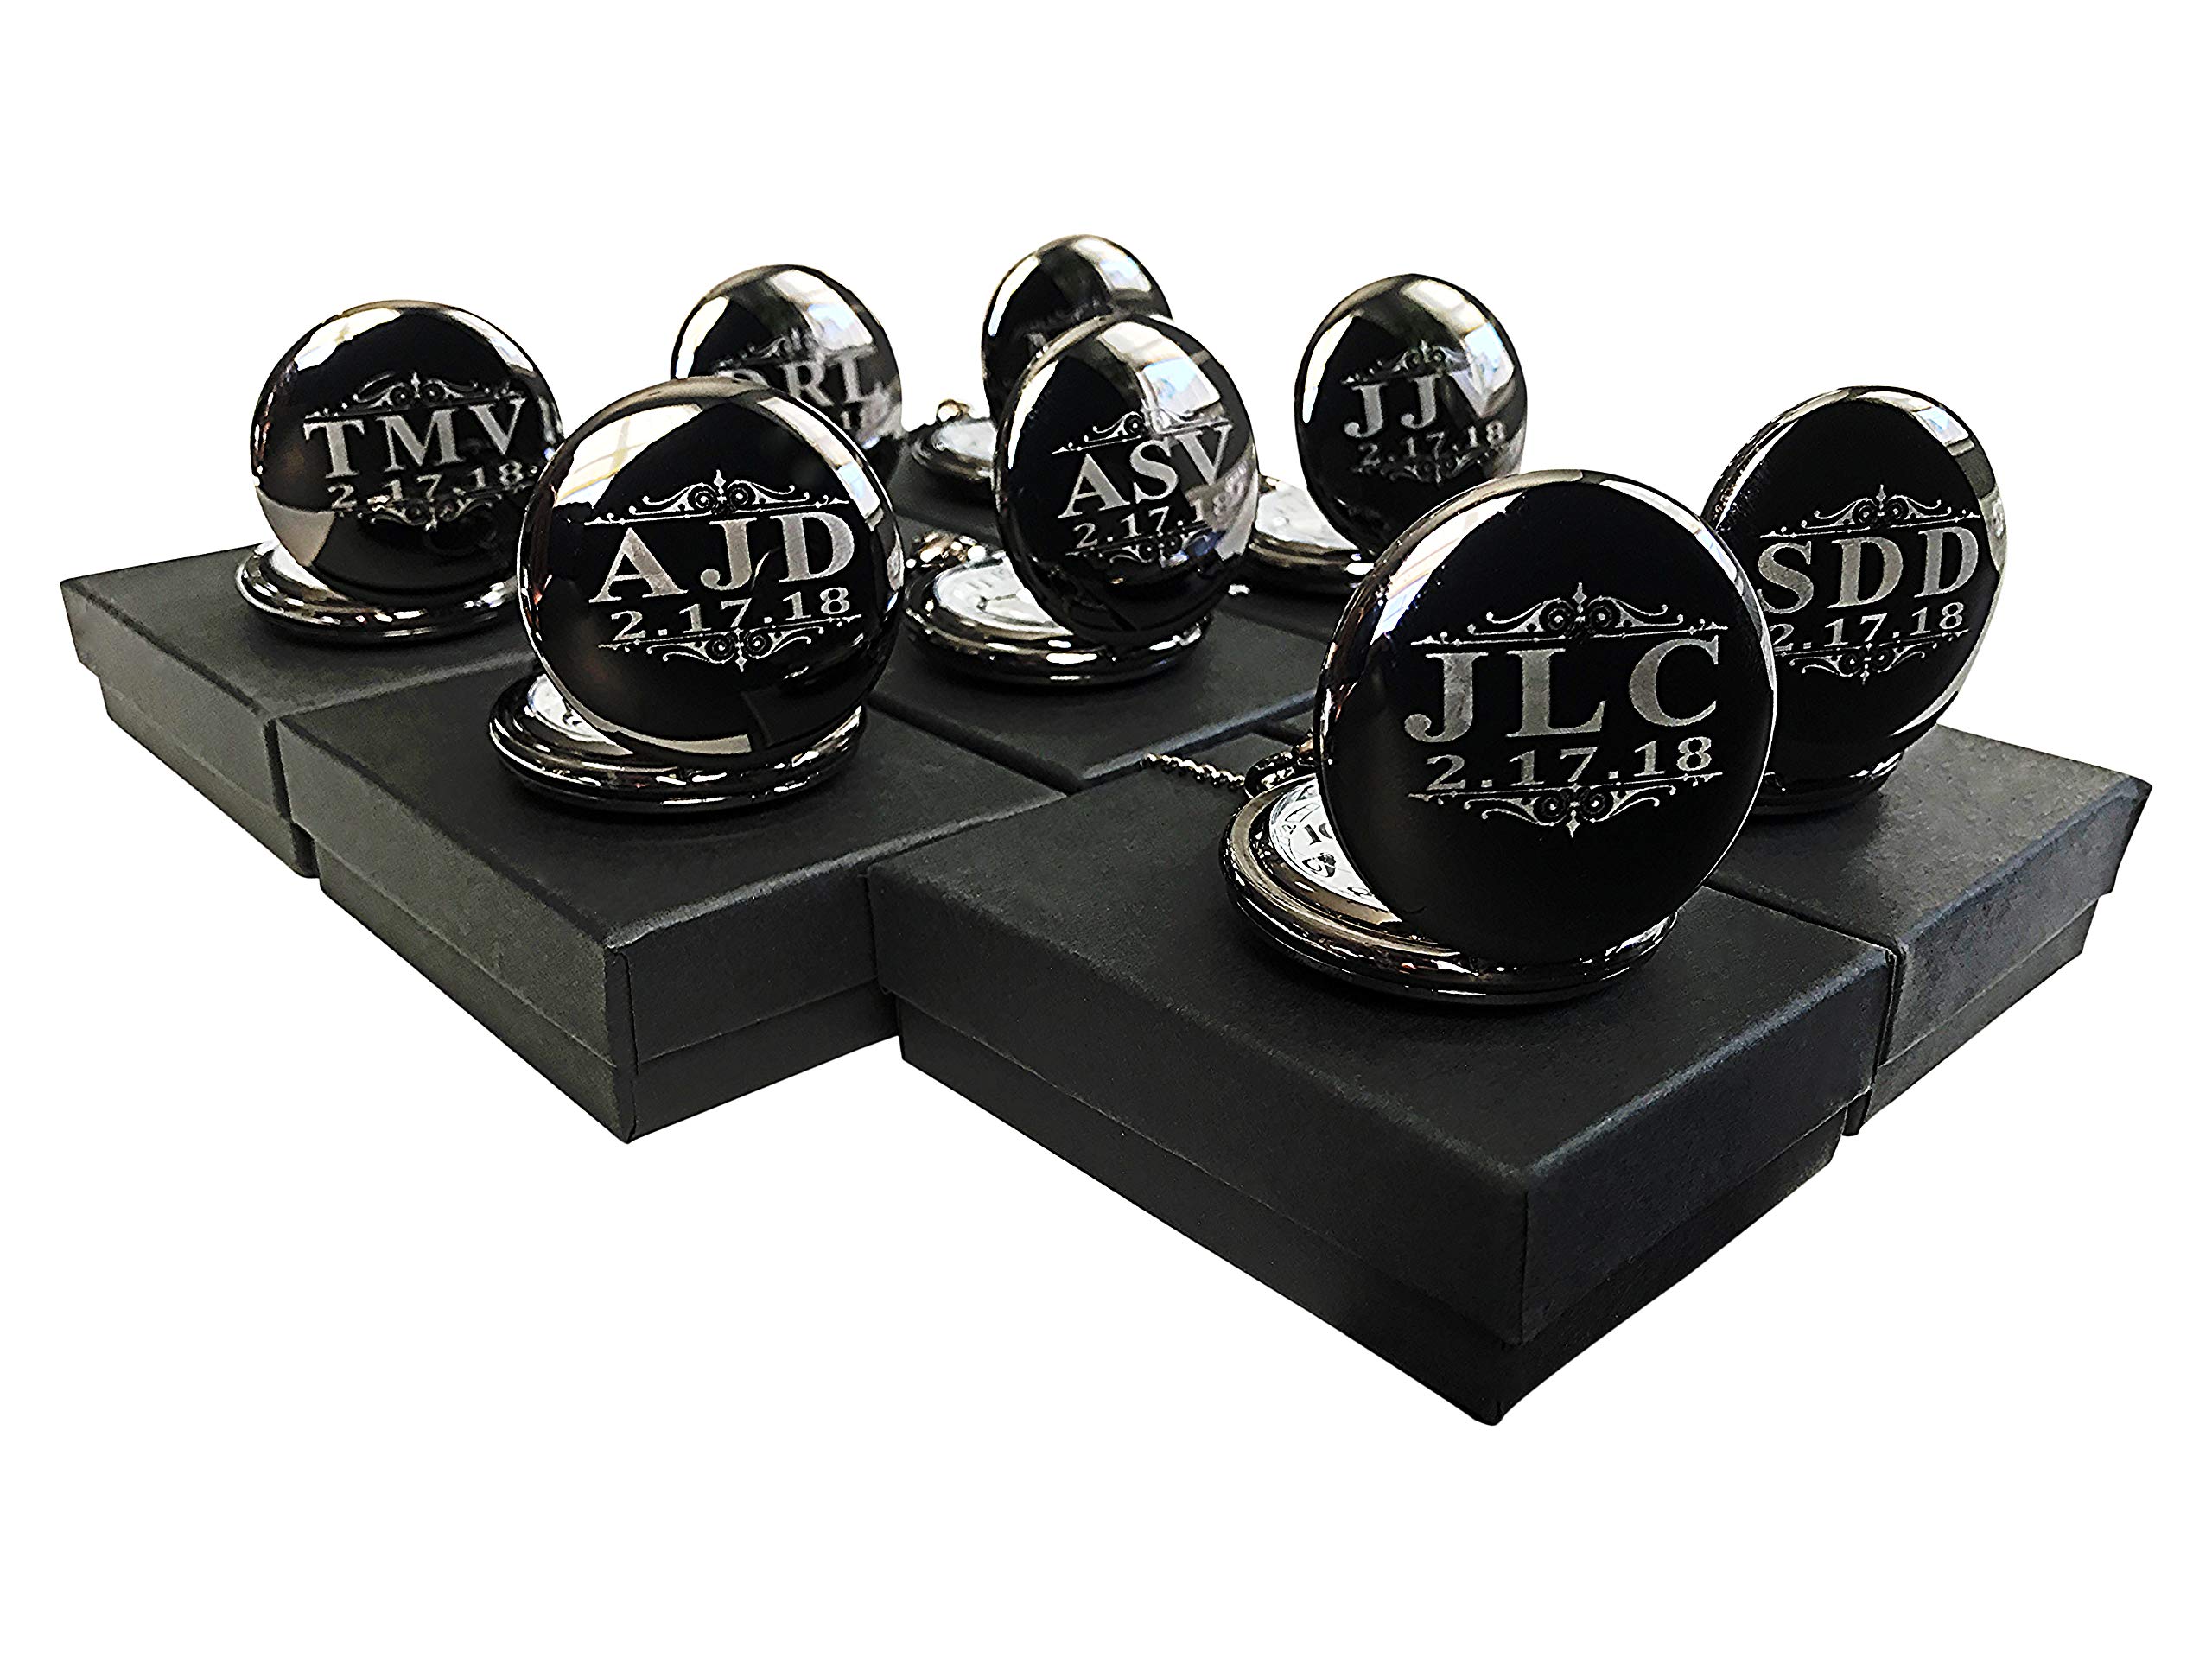 8 Personalized Pocket Watches, Set of 8 Groomsmen Wedding Unique Gifts, Chain, Box and Engraving Included, Comes in 4 Colors